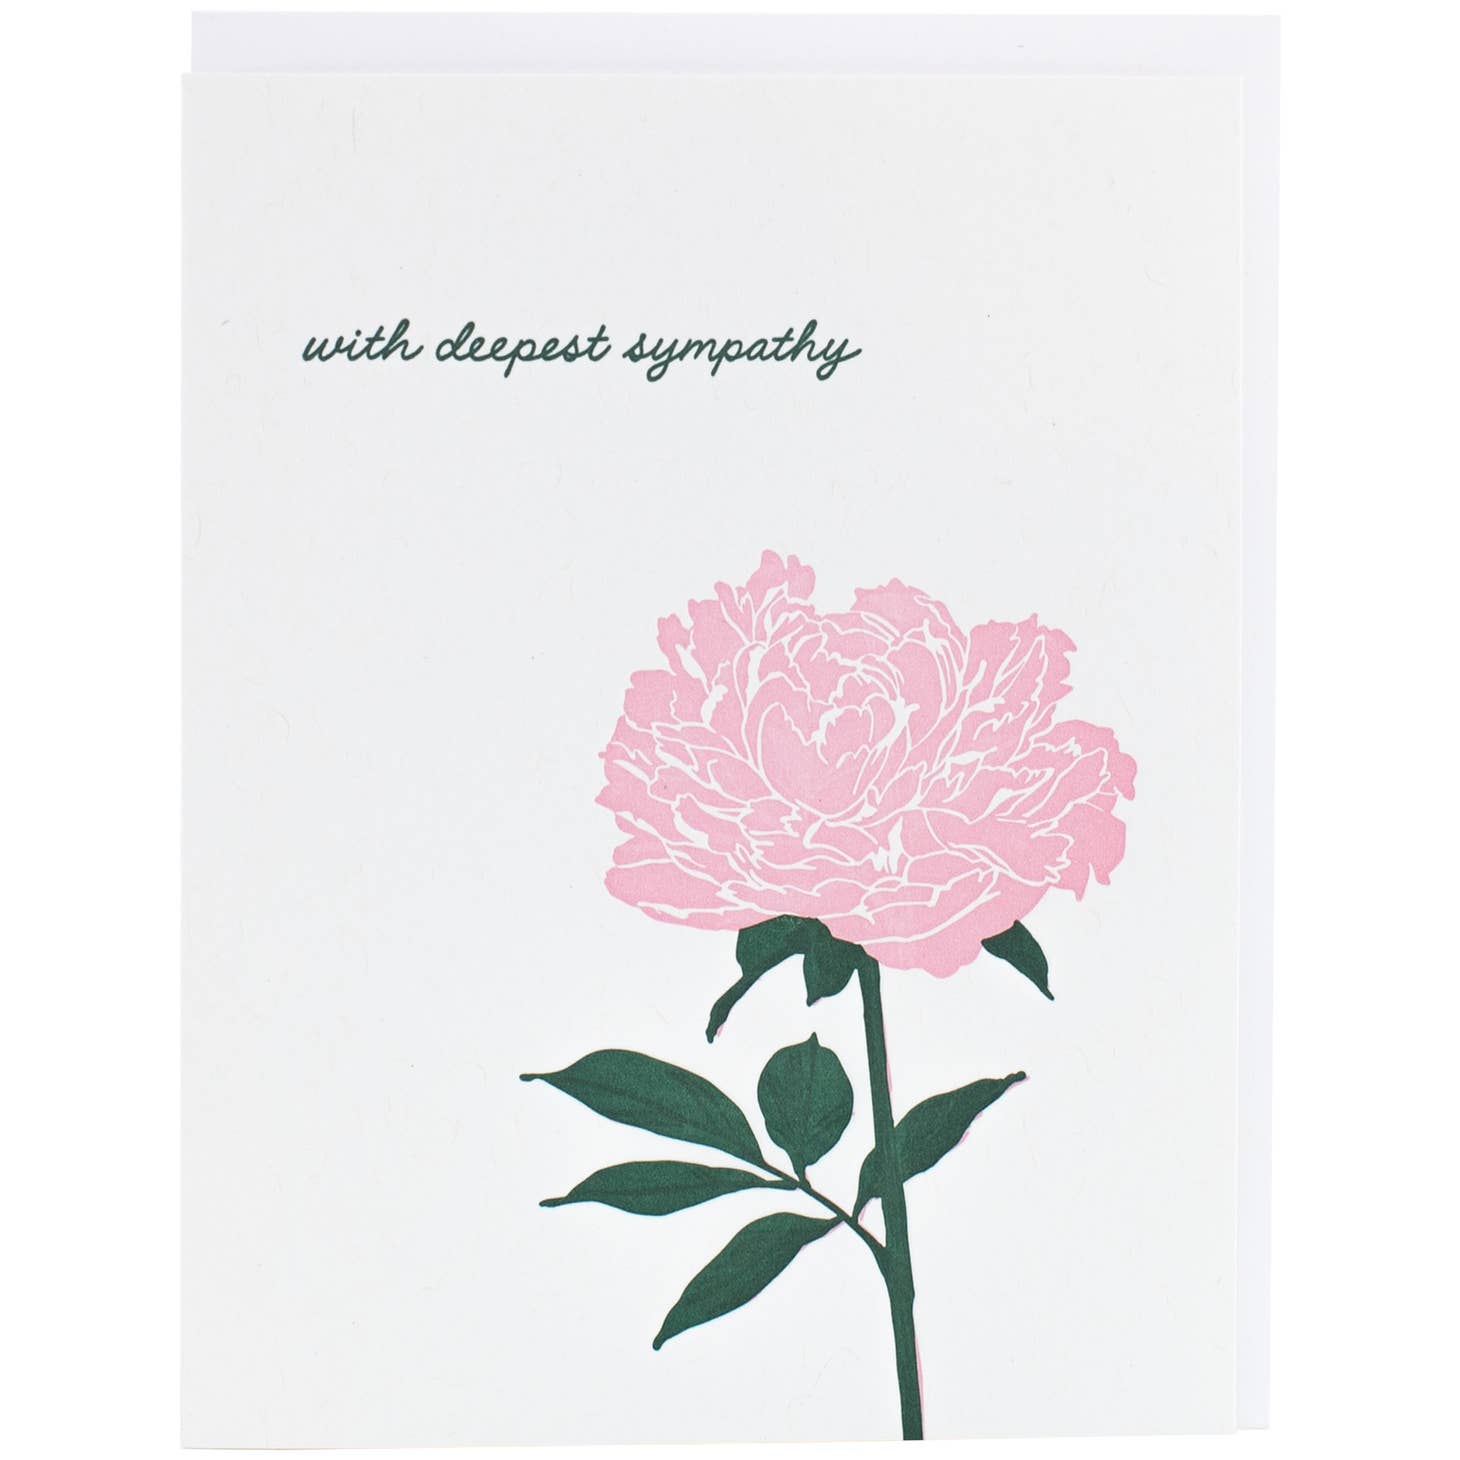 Ivory background with image of blooming pink peony. Green text says, “with deepest sympathy”. White envelope included. 